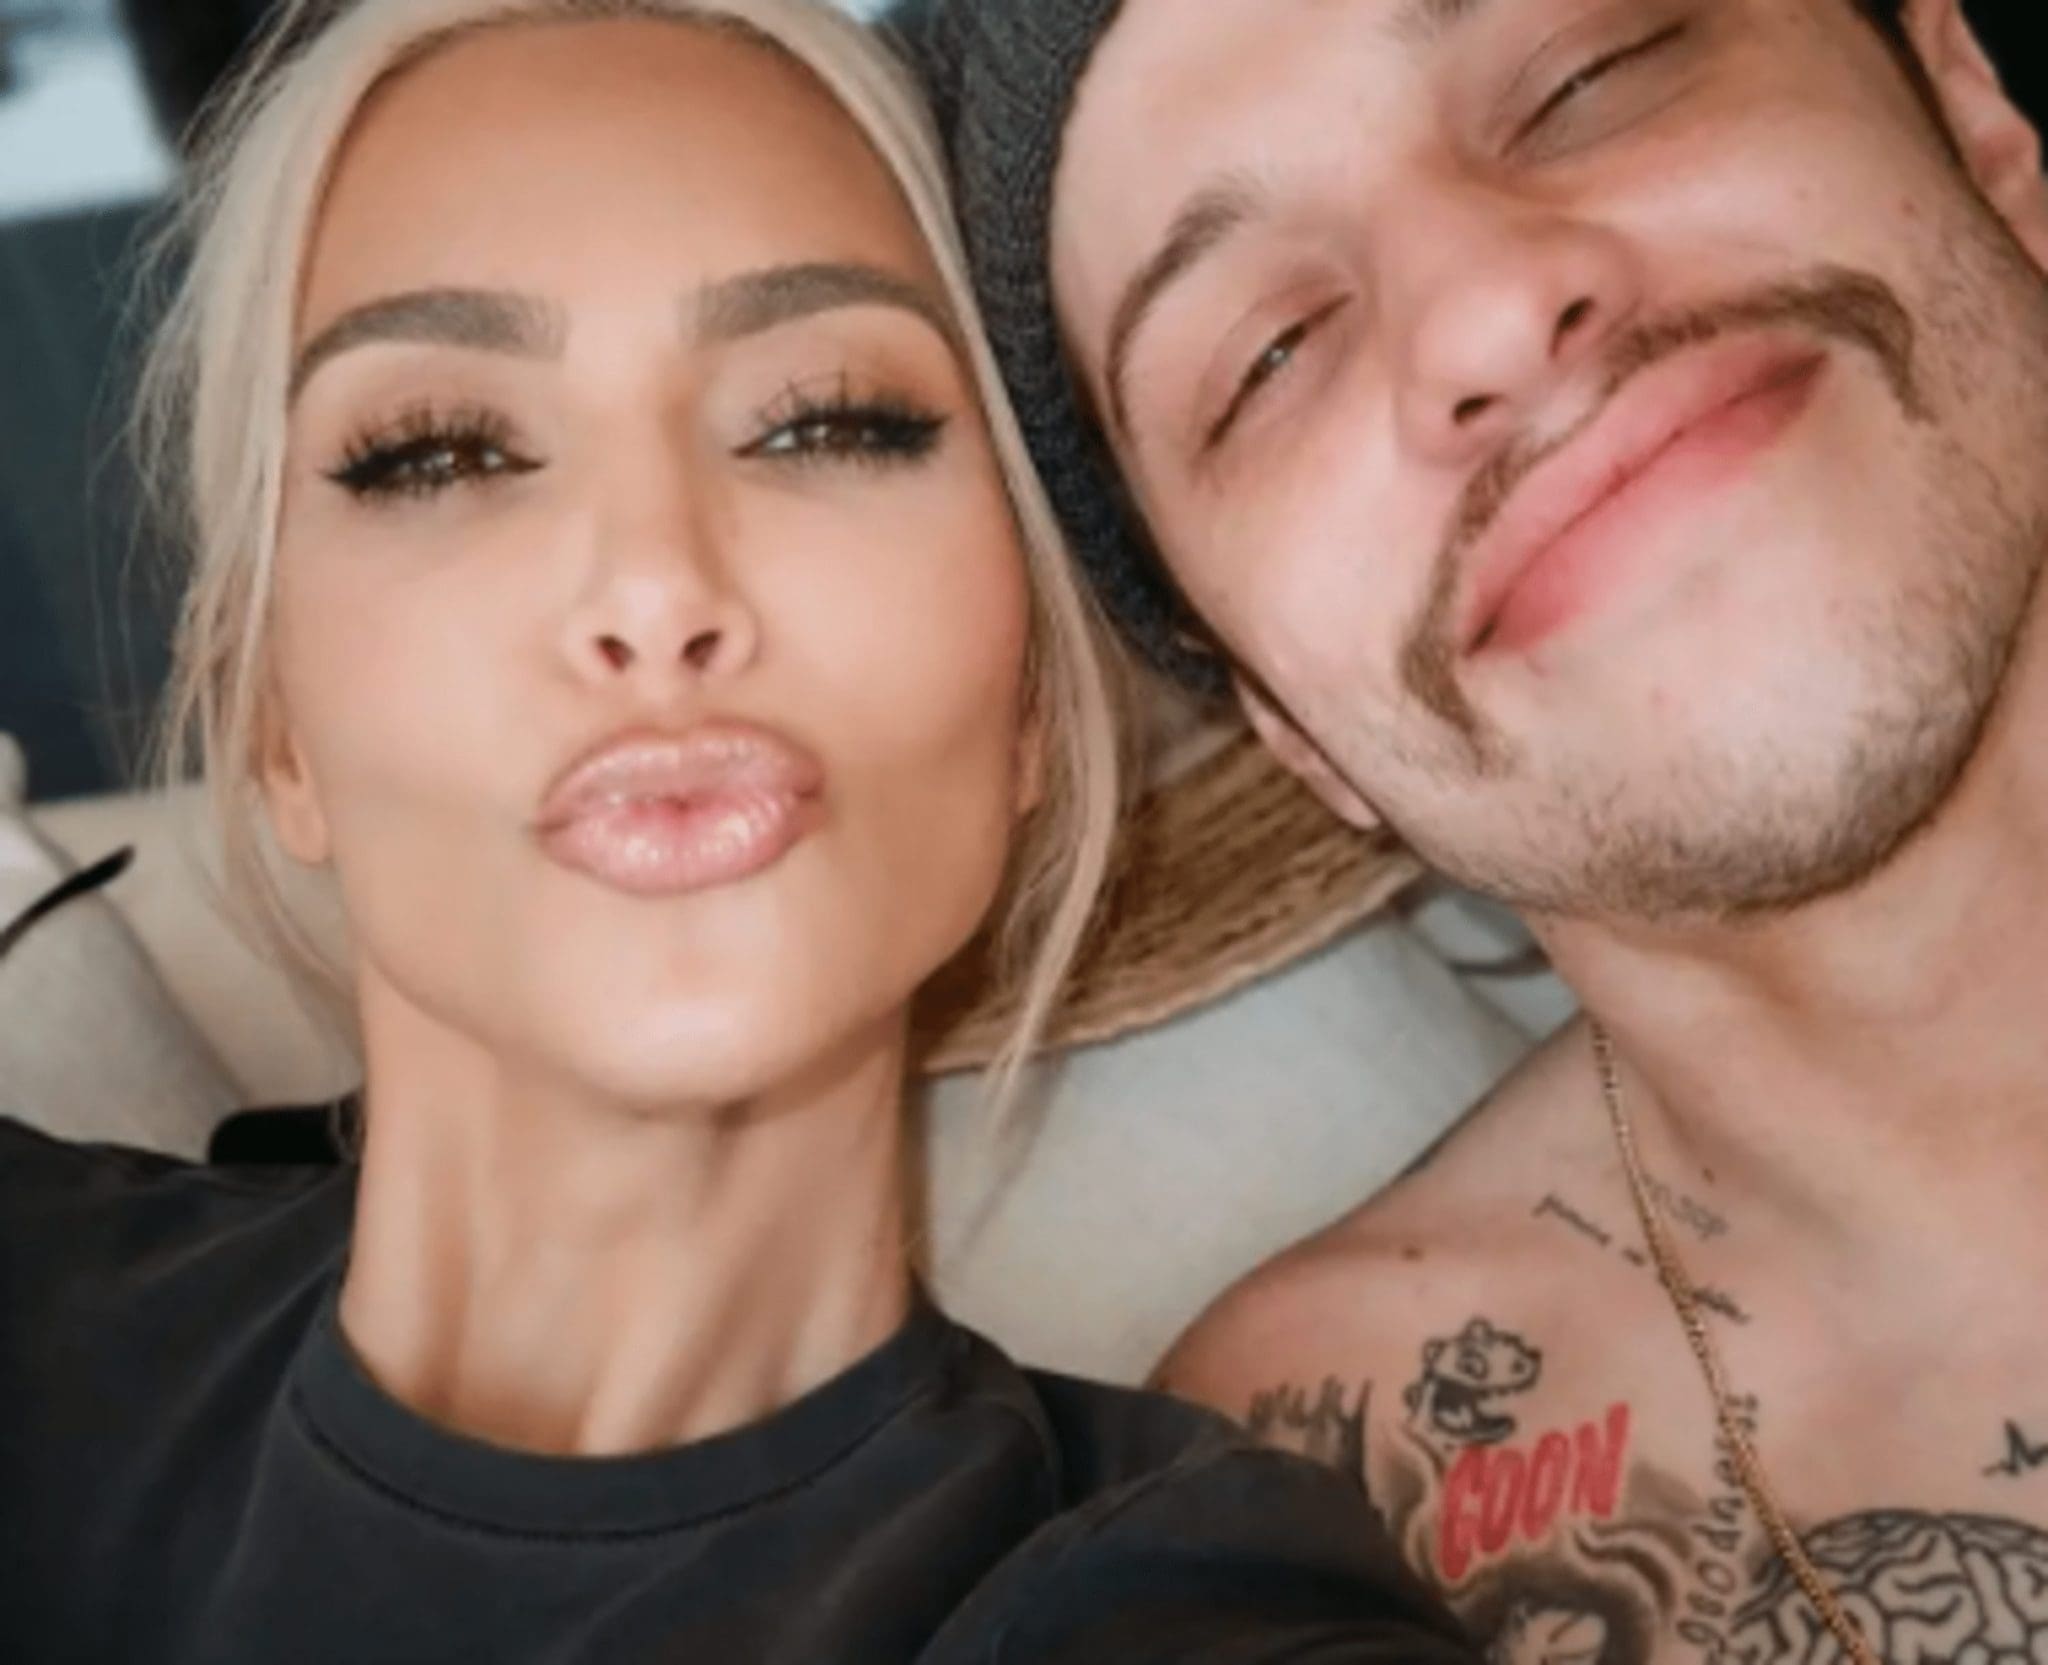 On The Kardashians, Pete Davidson Won't Be Seen Too Much